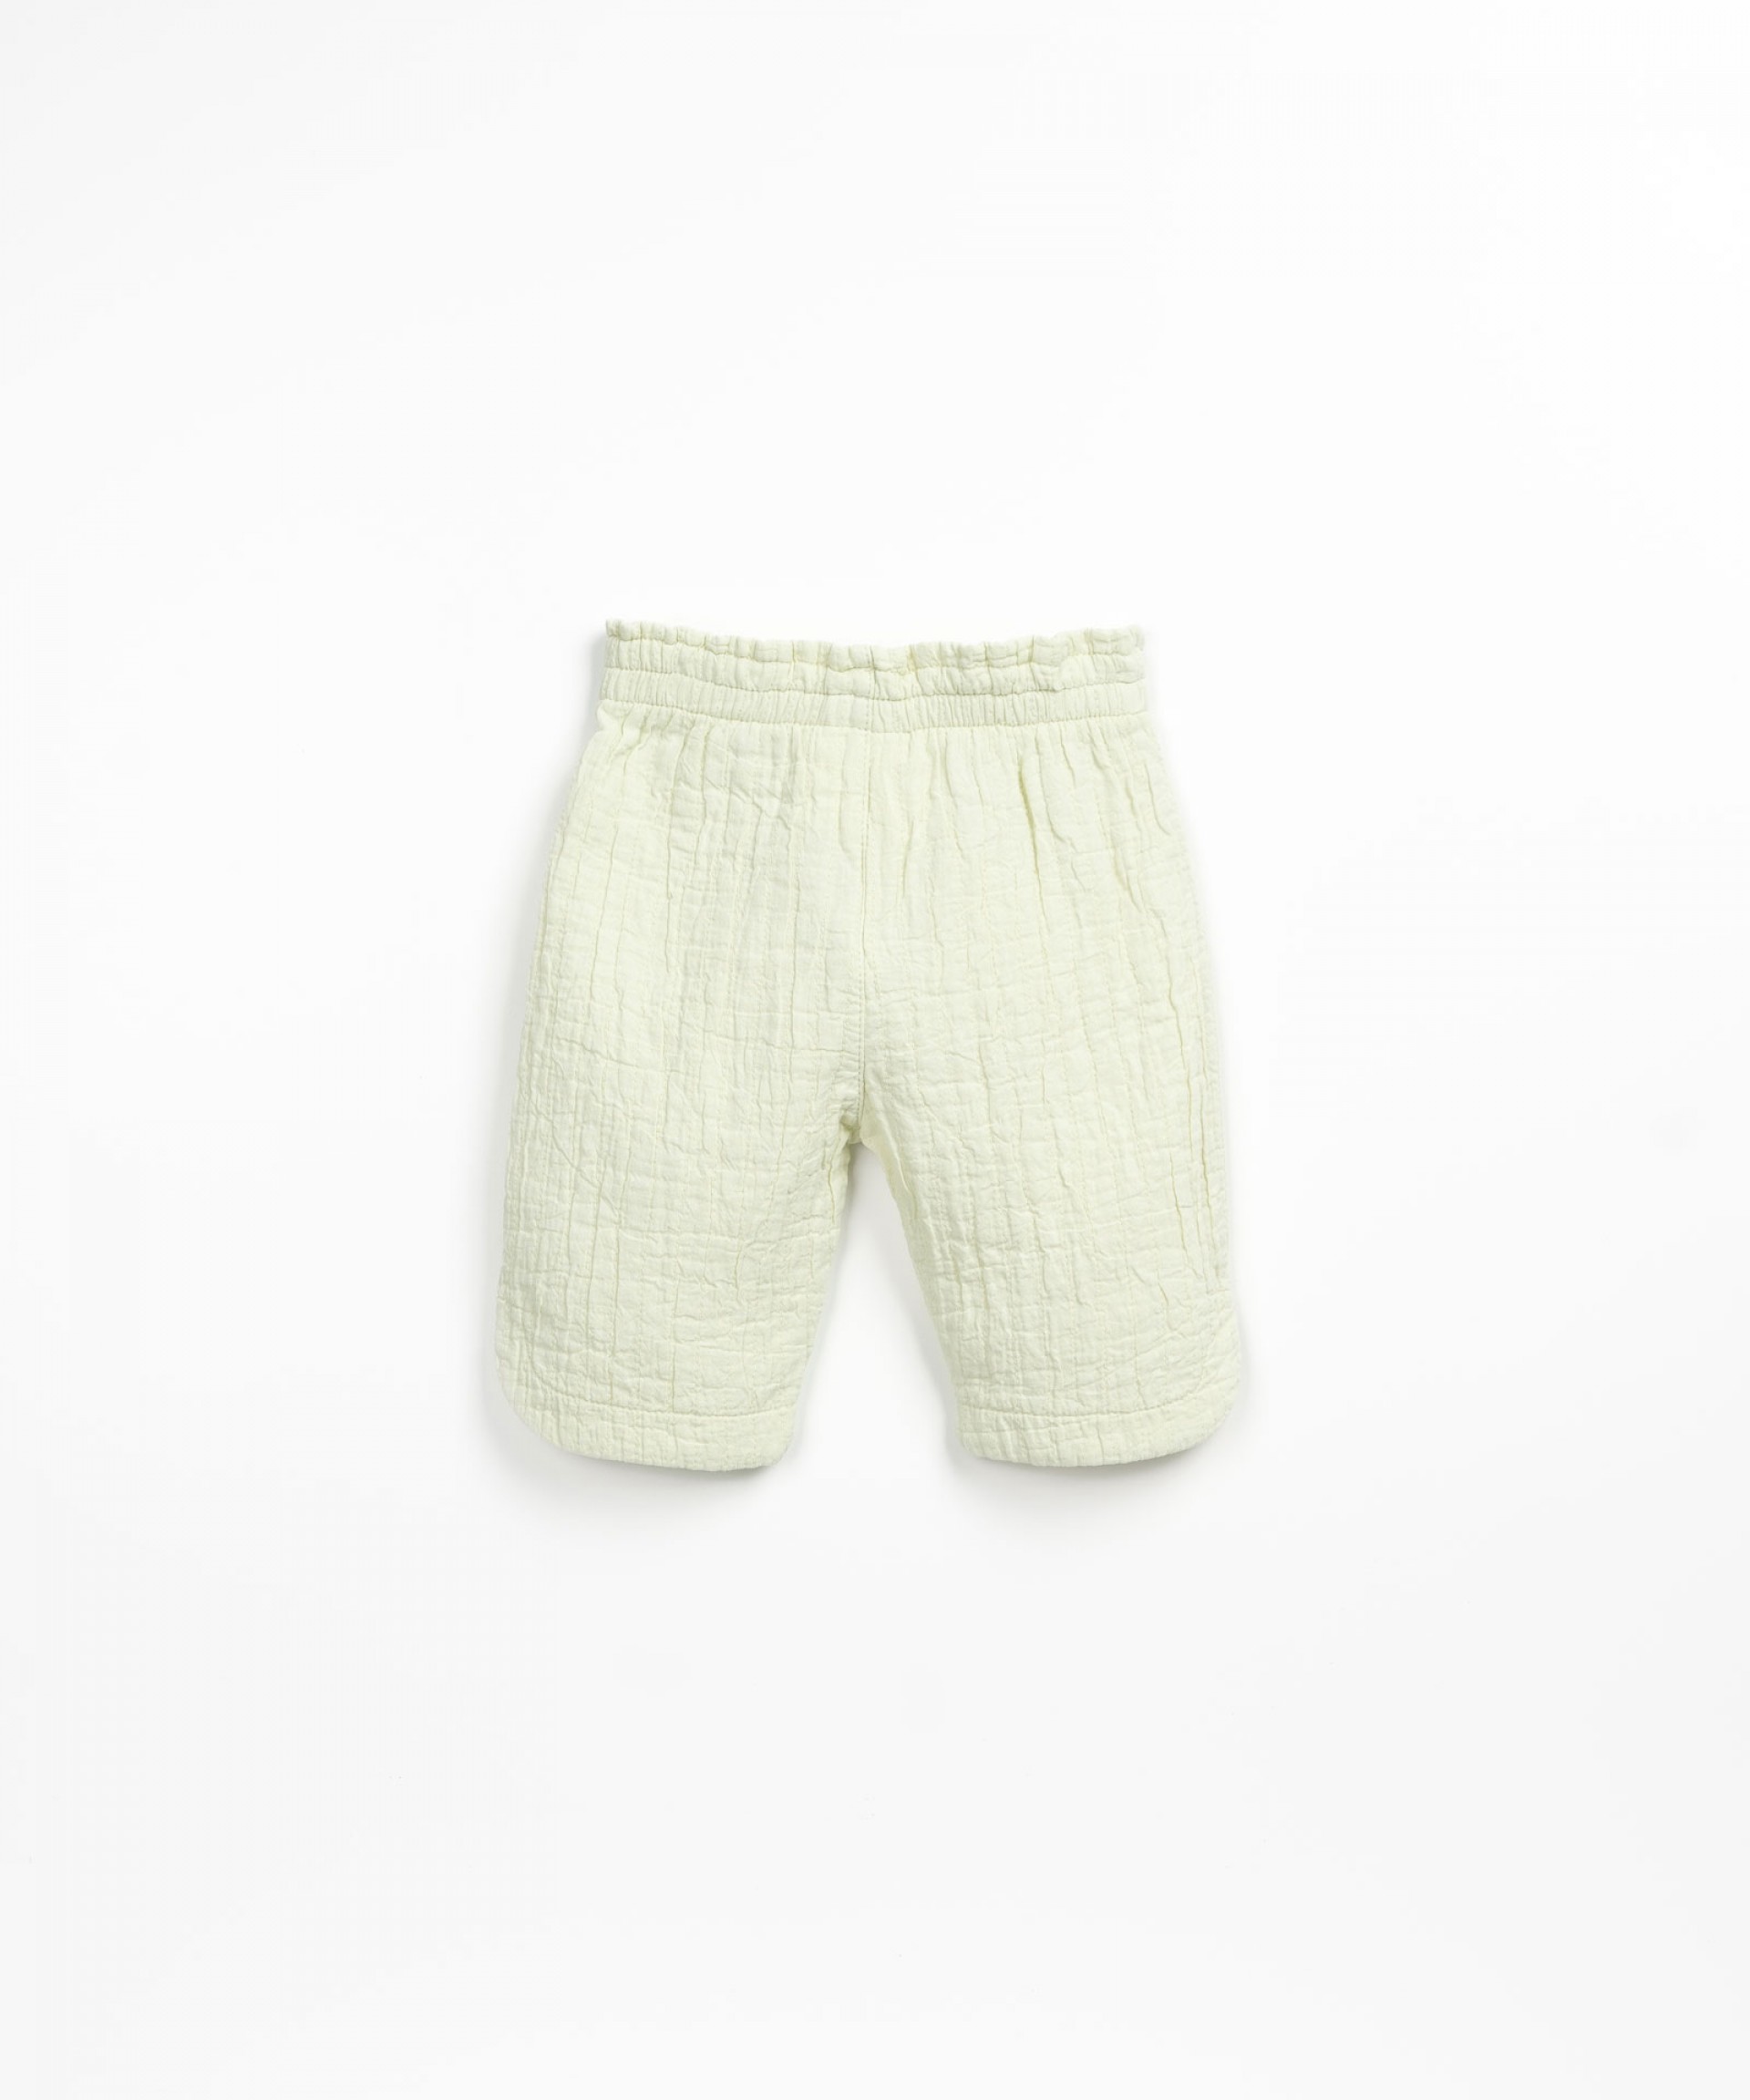 Woven trousers with elastic waist | Textile Art